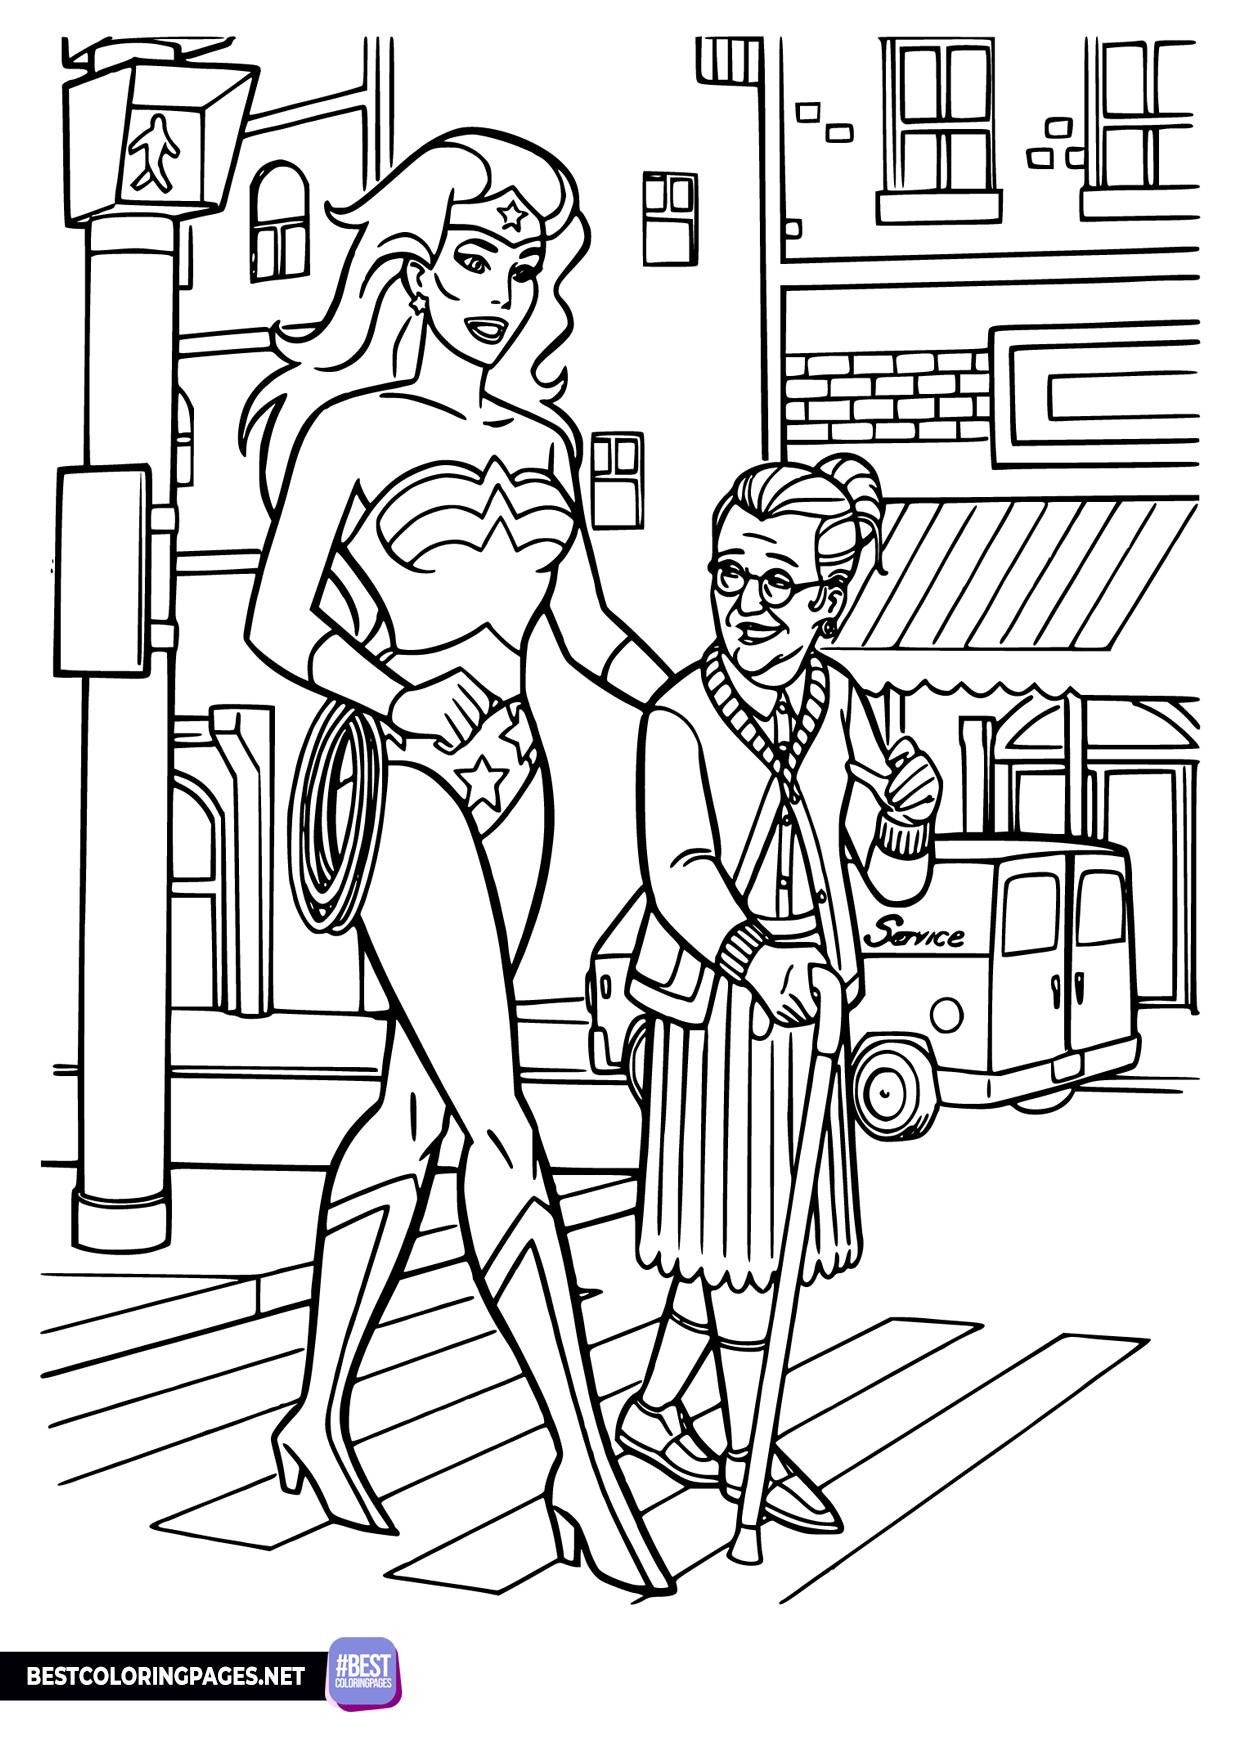 Wonder woman coloring page for kids